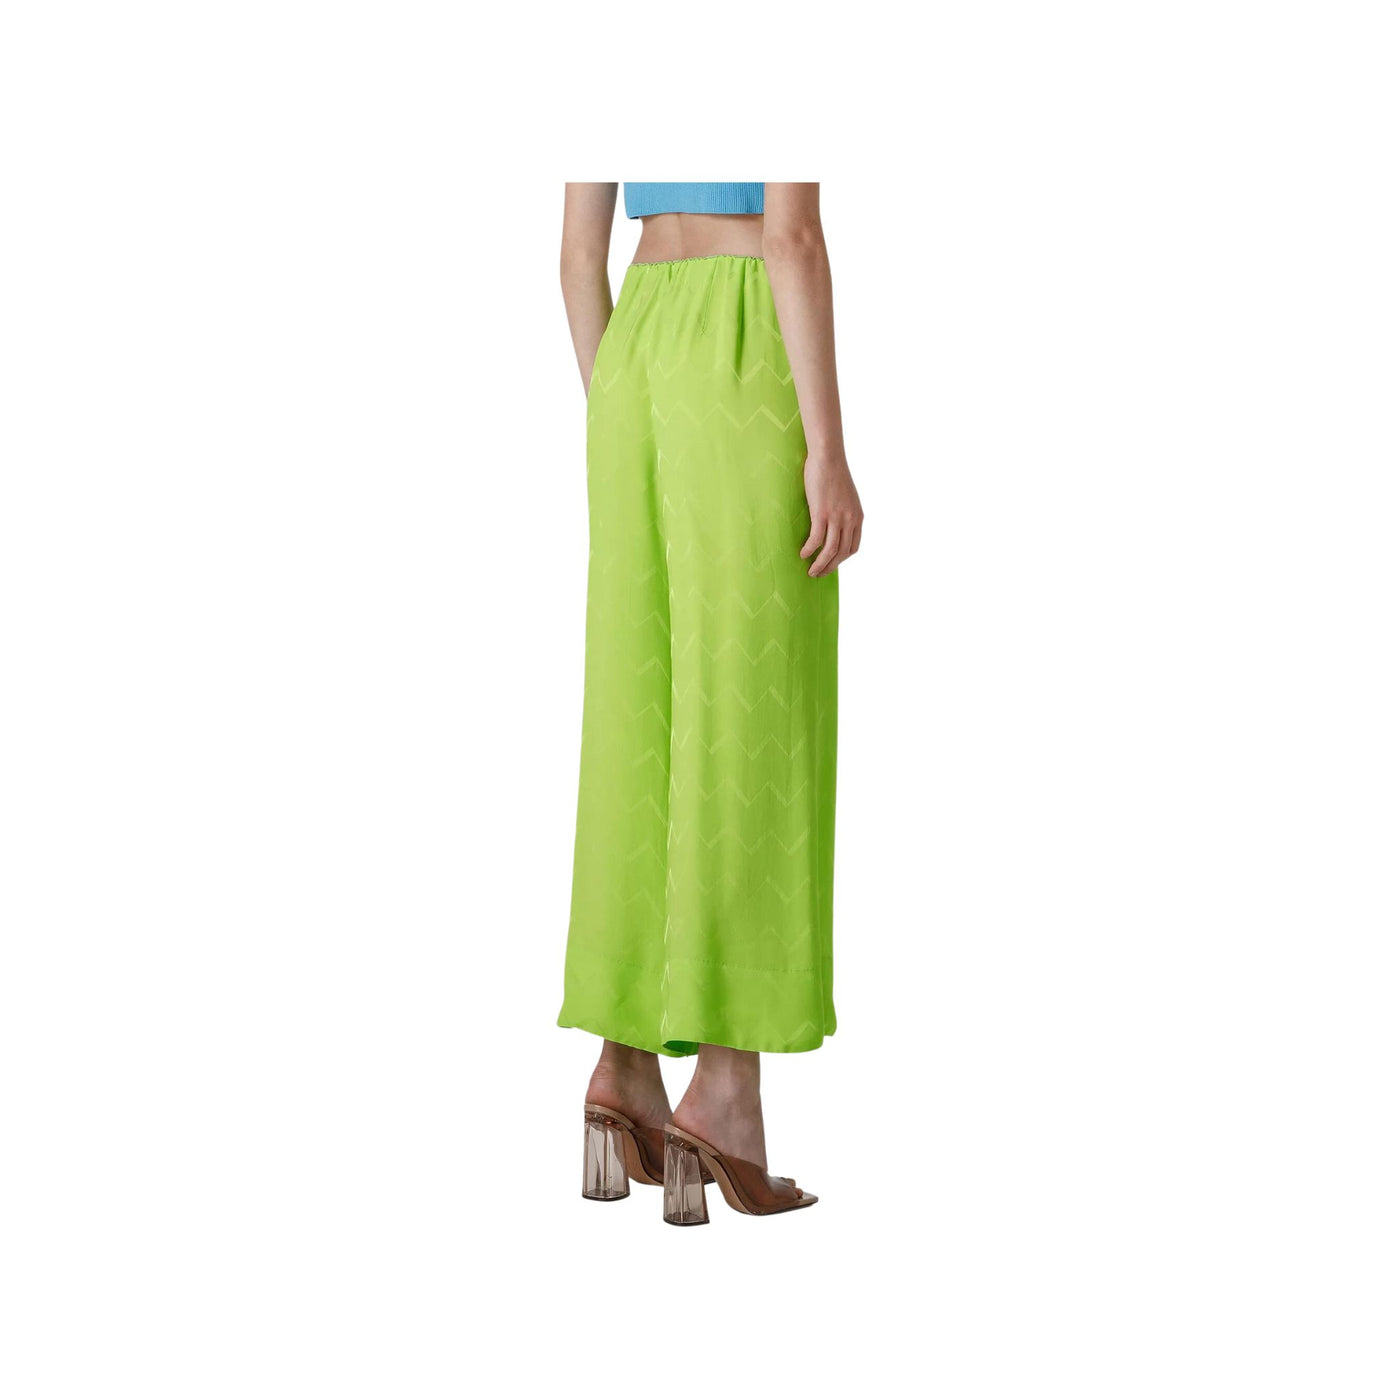 Women's palazzo trousers with elastic